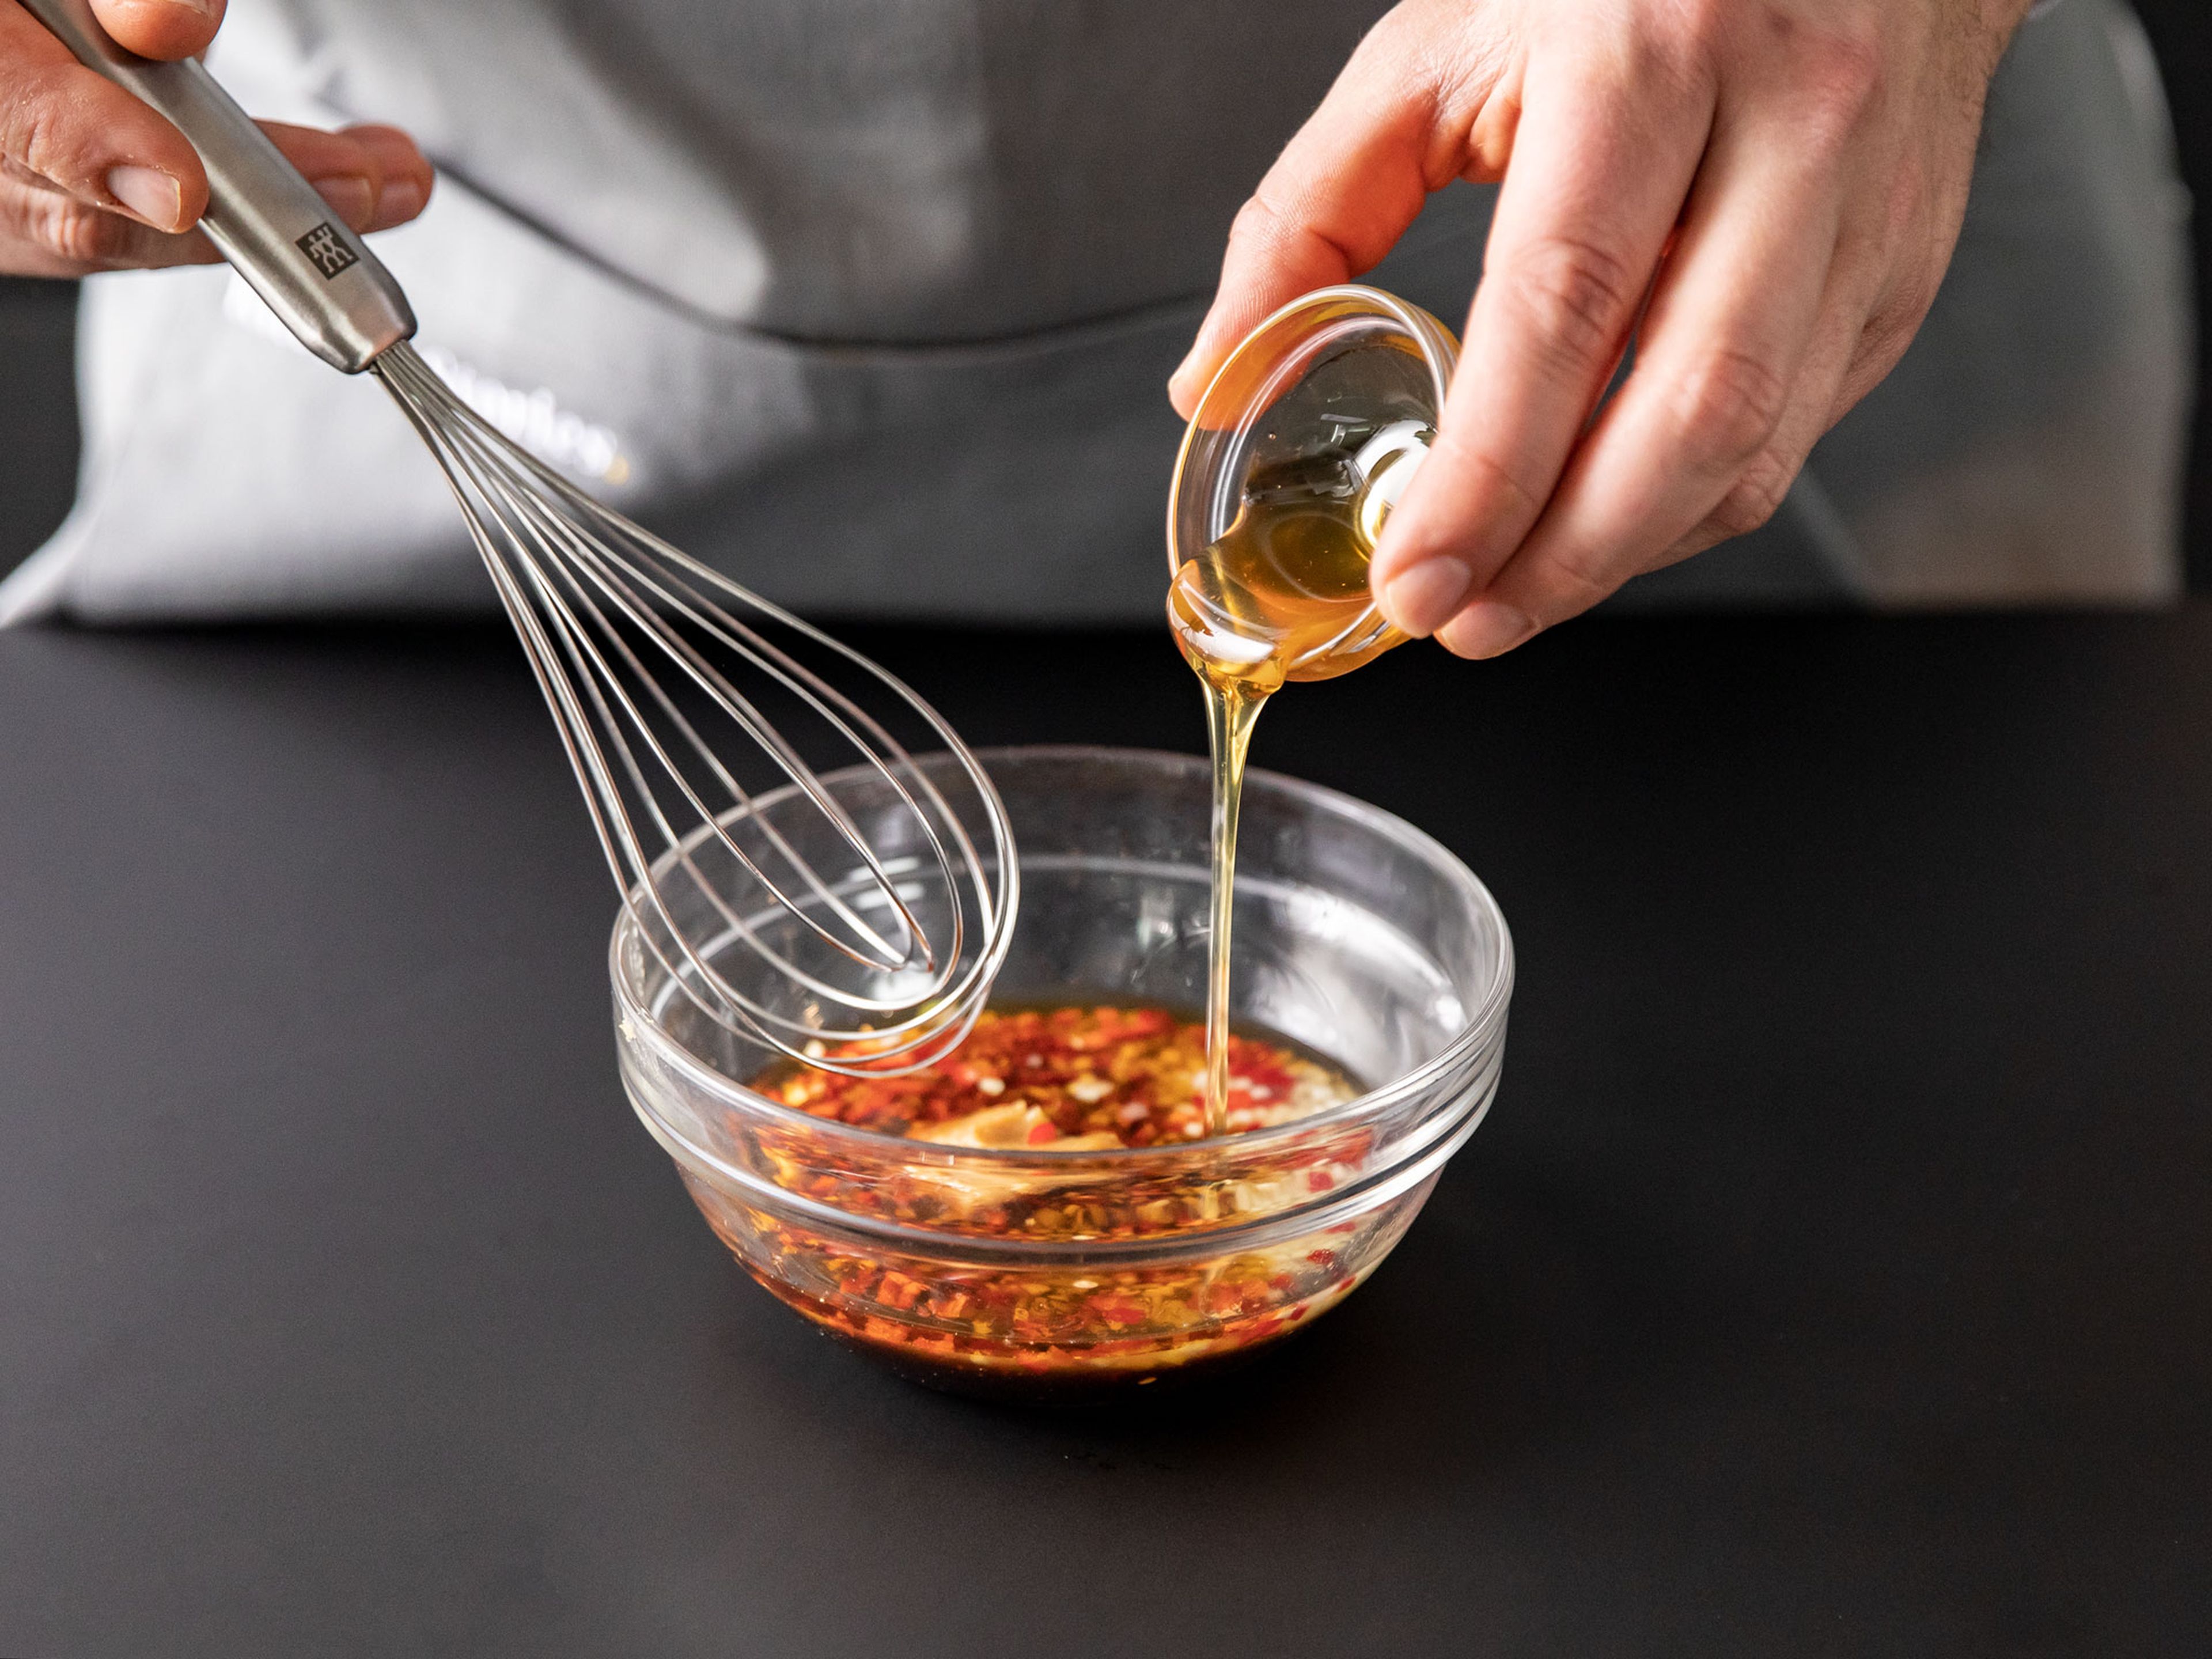 To make the dressing, add miso paste, toasted sesame oil, soy sauce, rice vinegar, and honey to a bowl. Add minced garlic, ginger, and chili and mix well to combine.